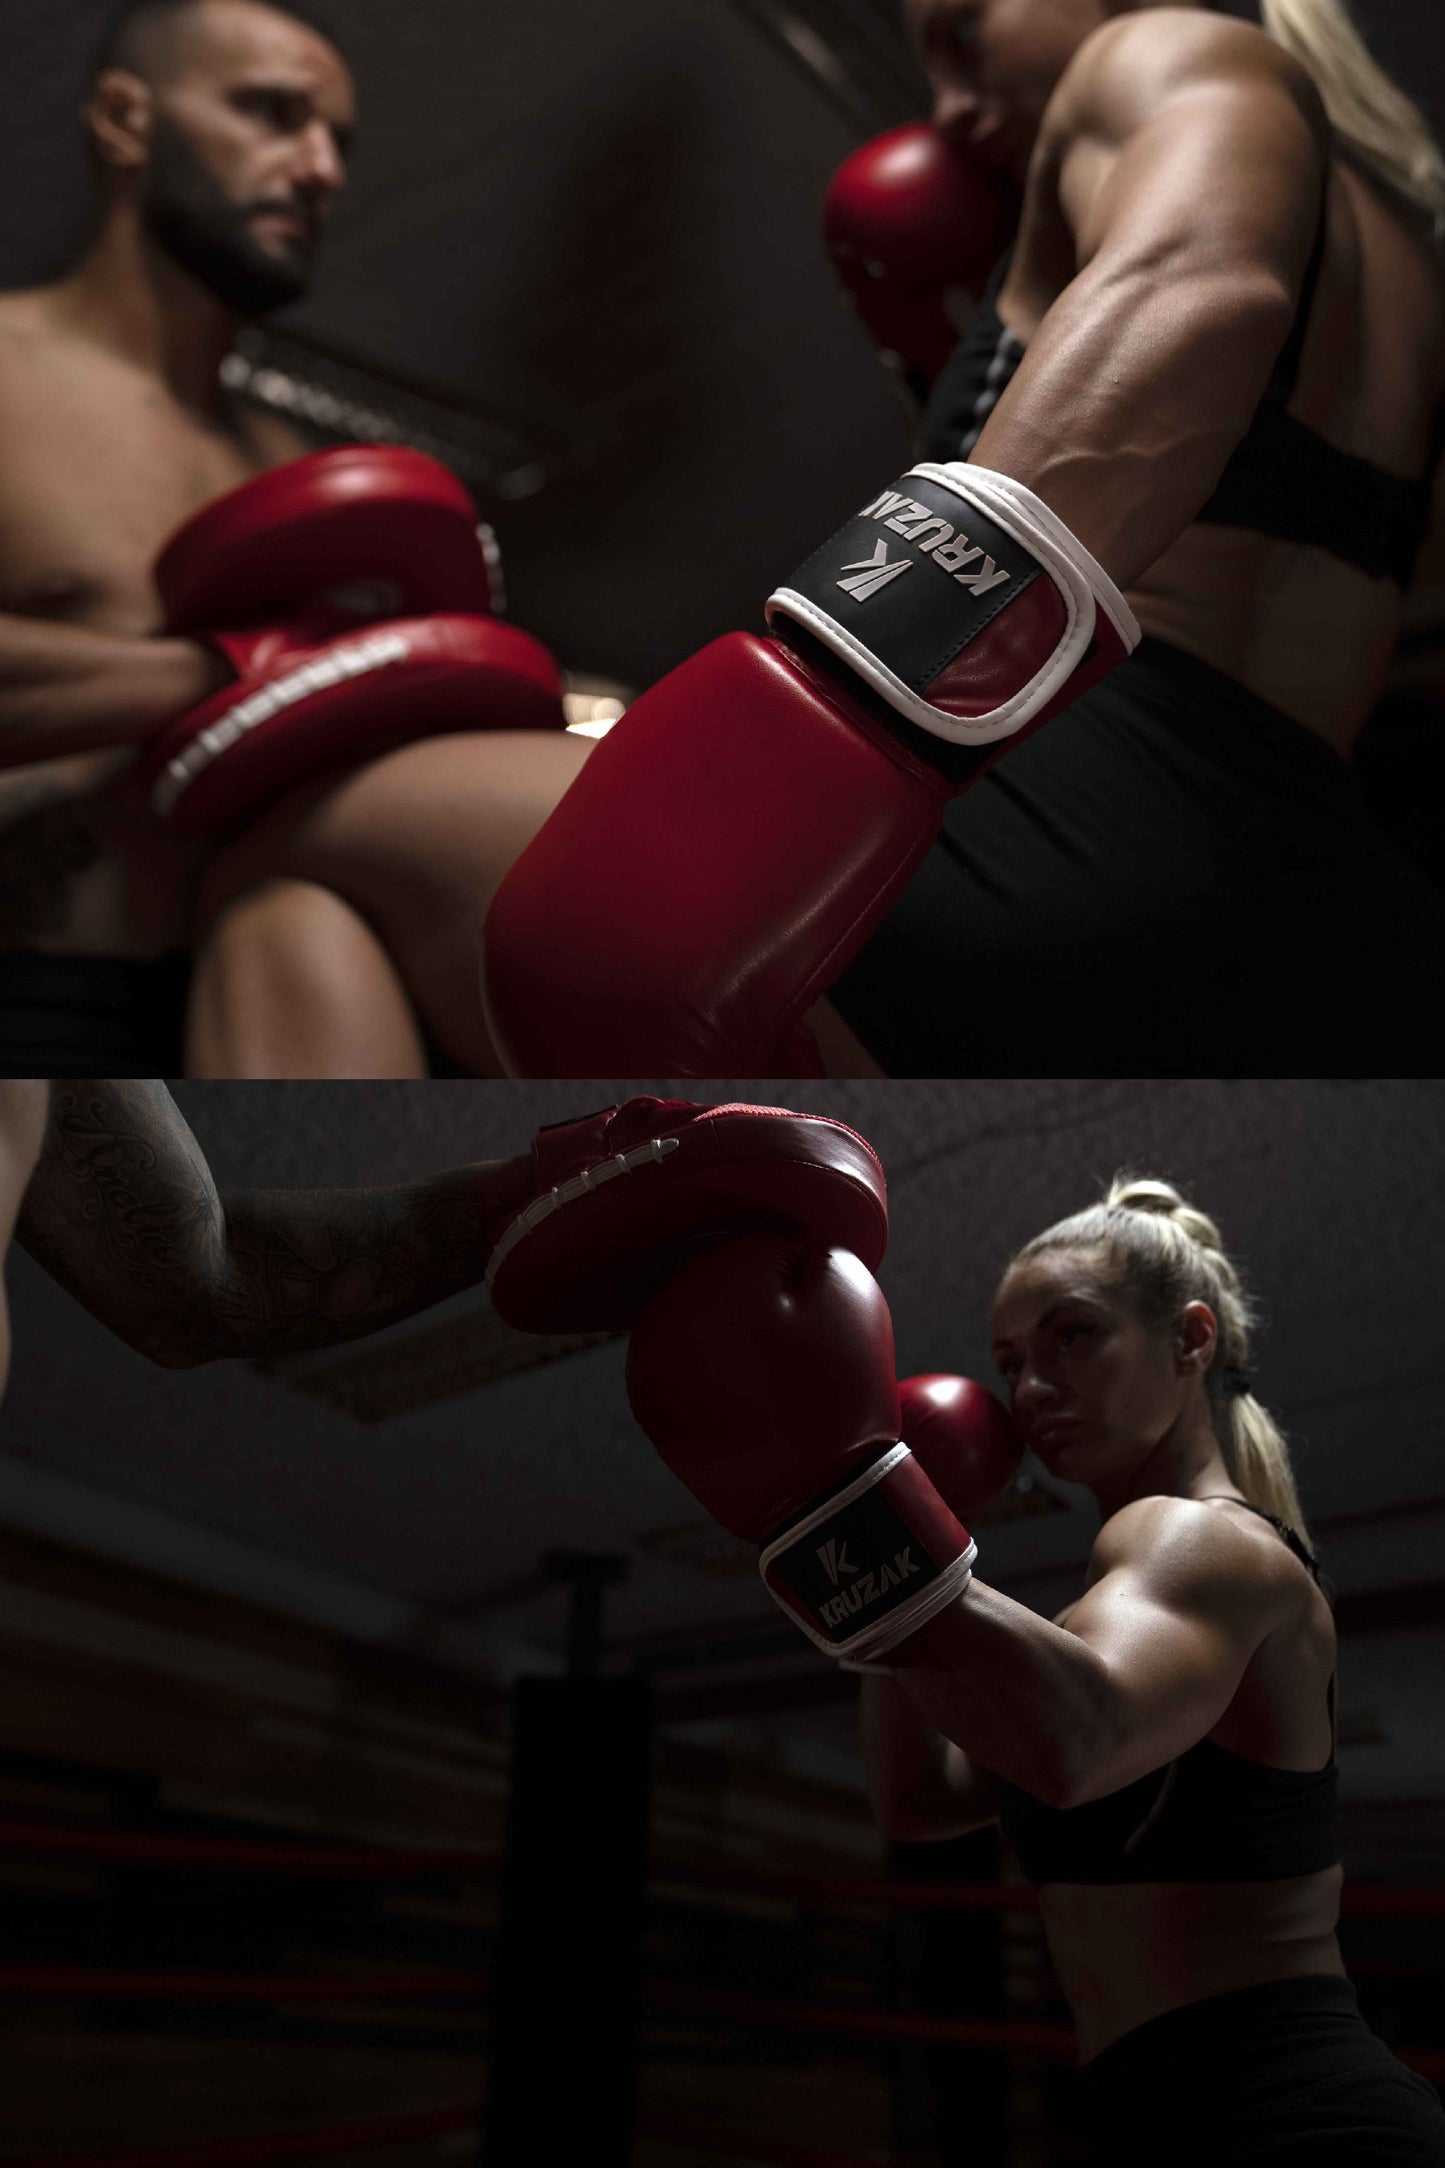 Product demonstration of Kruzak Unisex Red Boxing Gloves and Focus Pads